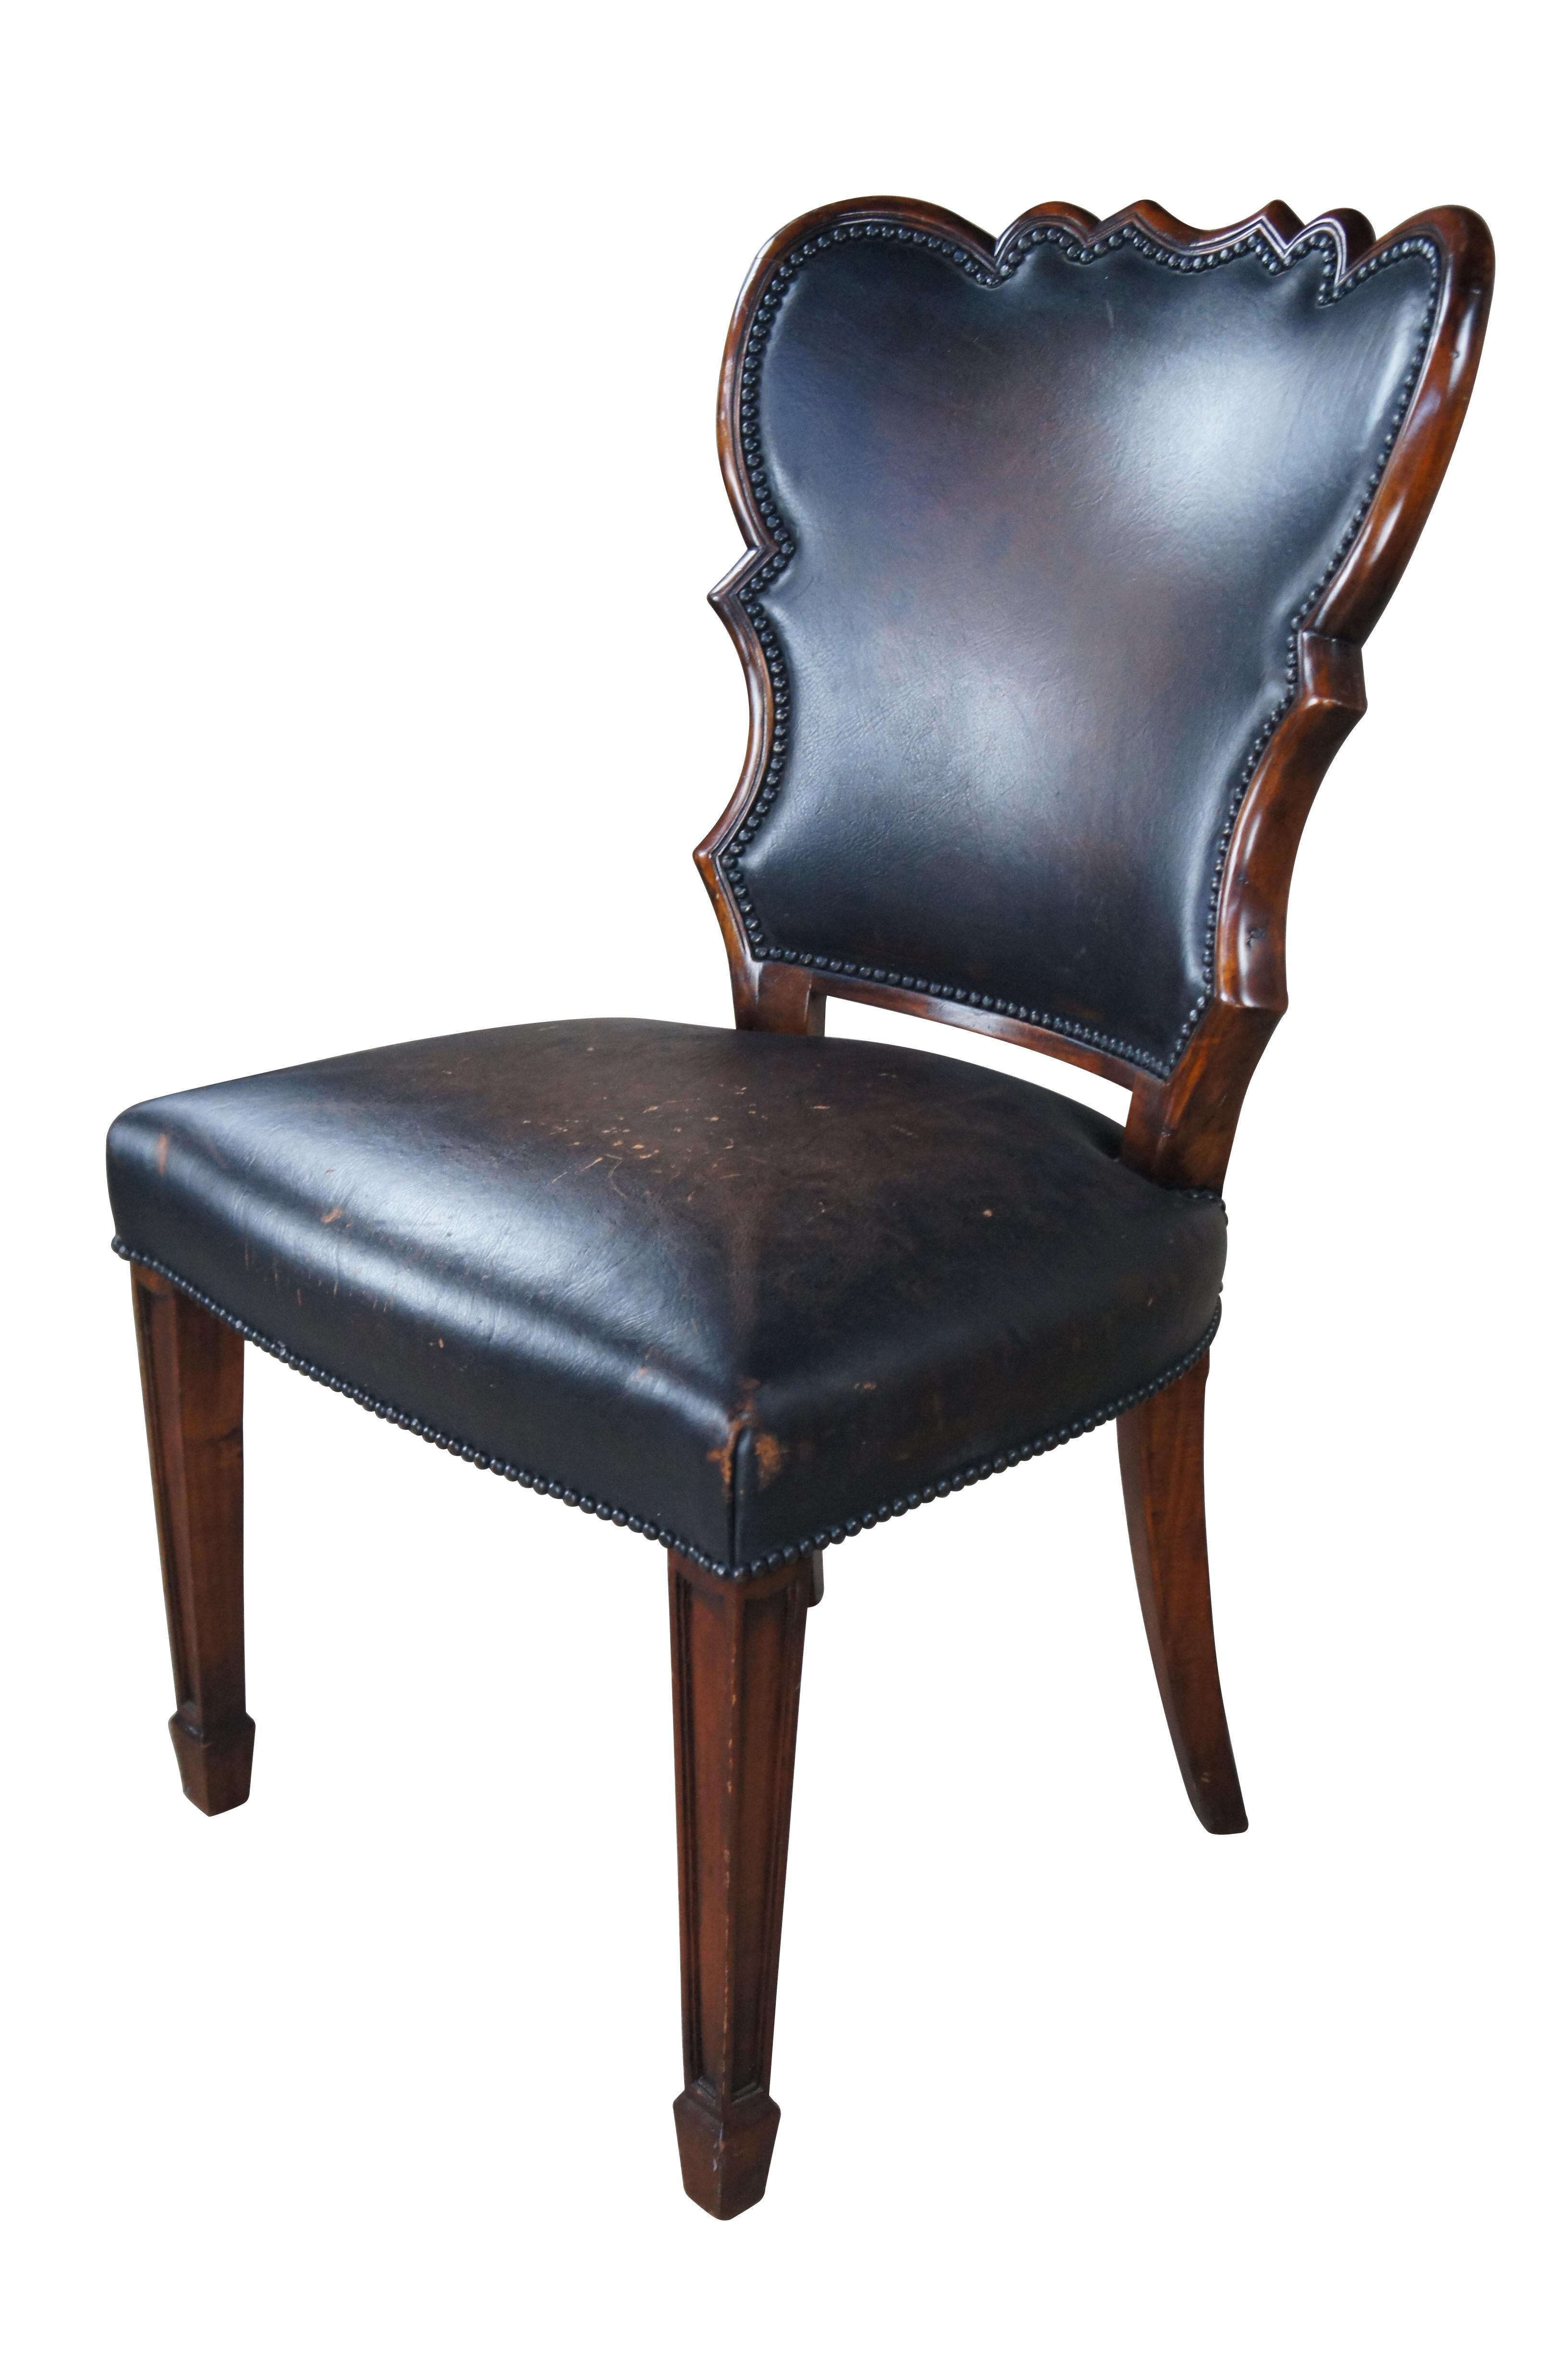 An exquisite late 20th century side chair by Theodore Alexander.  Designed in the manner of Sheraton / Federal styling with a sculptural back and large seat over square tapered legs leading to spade feet.  Rear legs are saber shaped.   The chair is